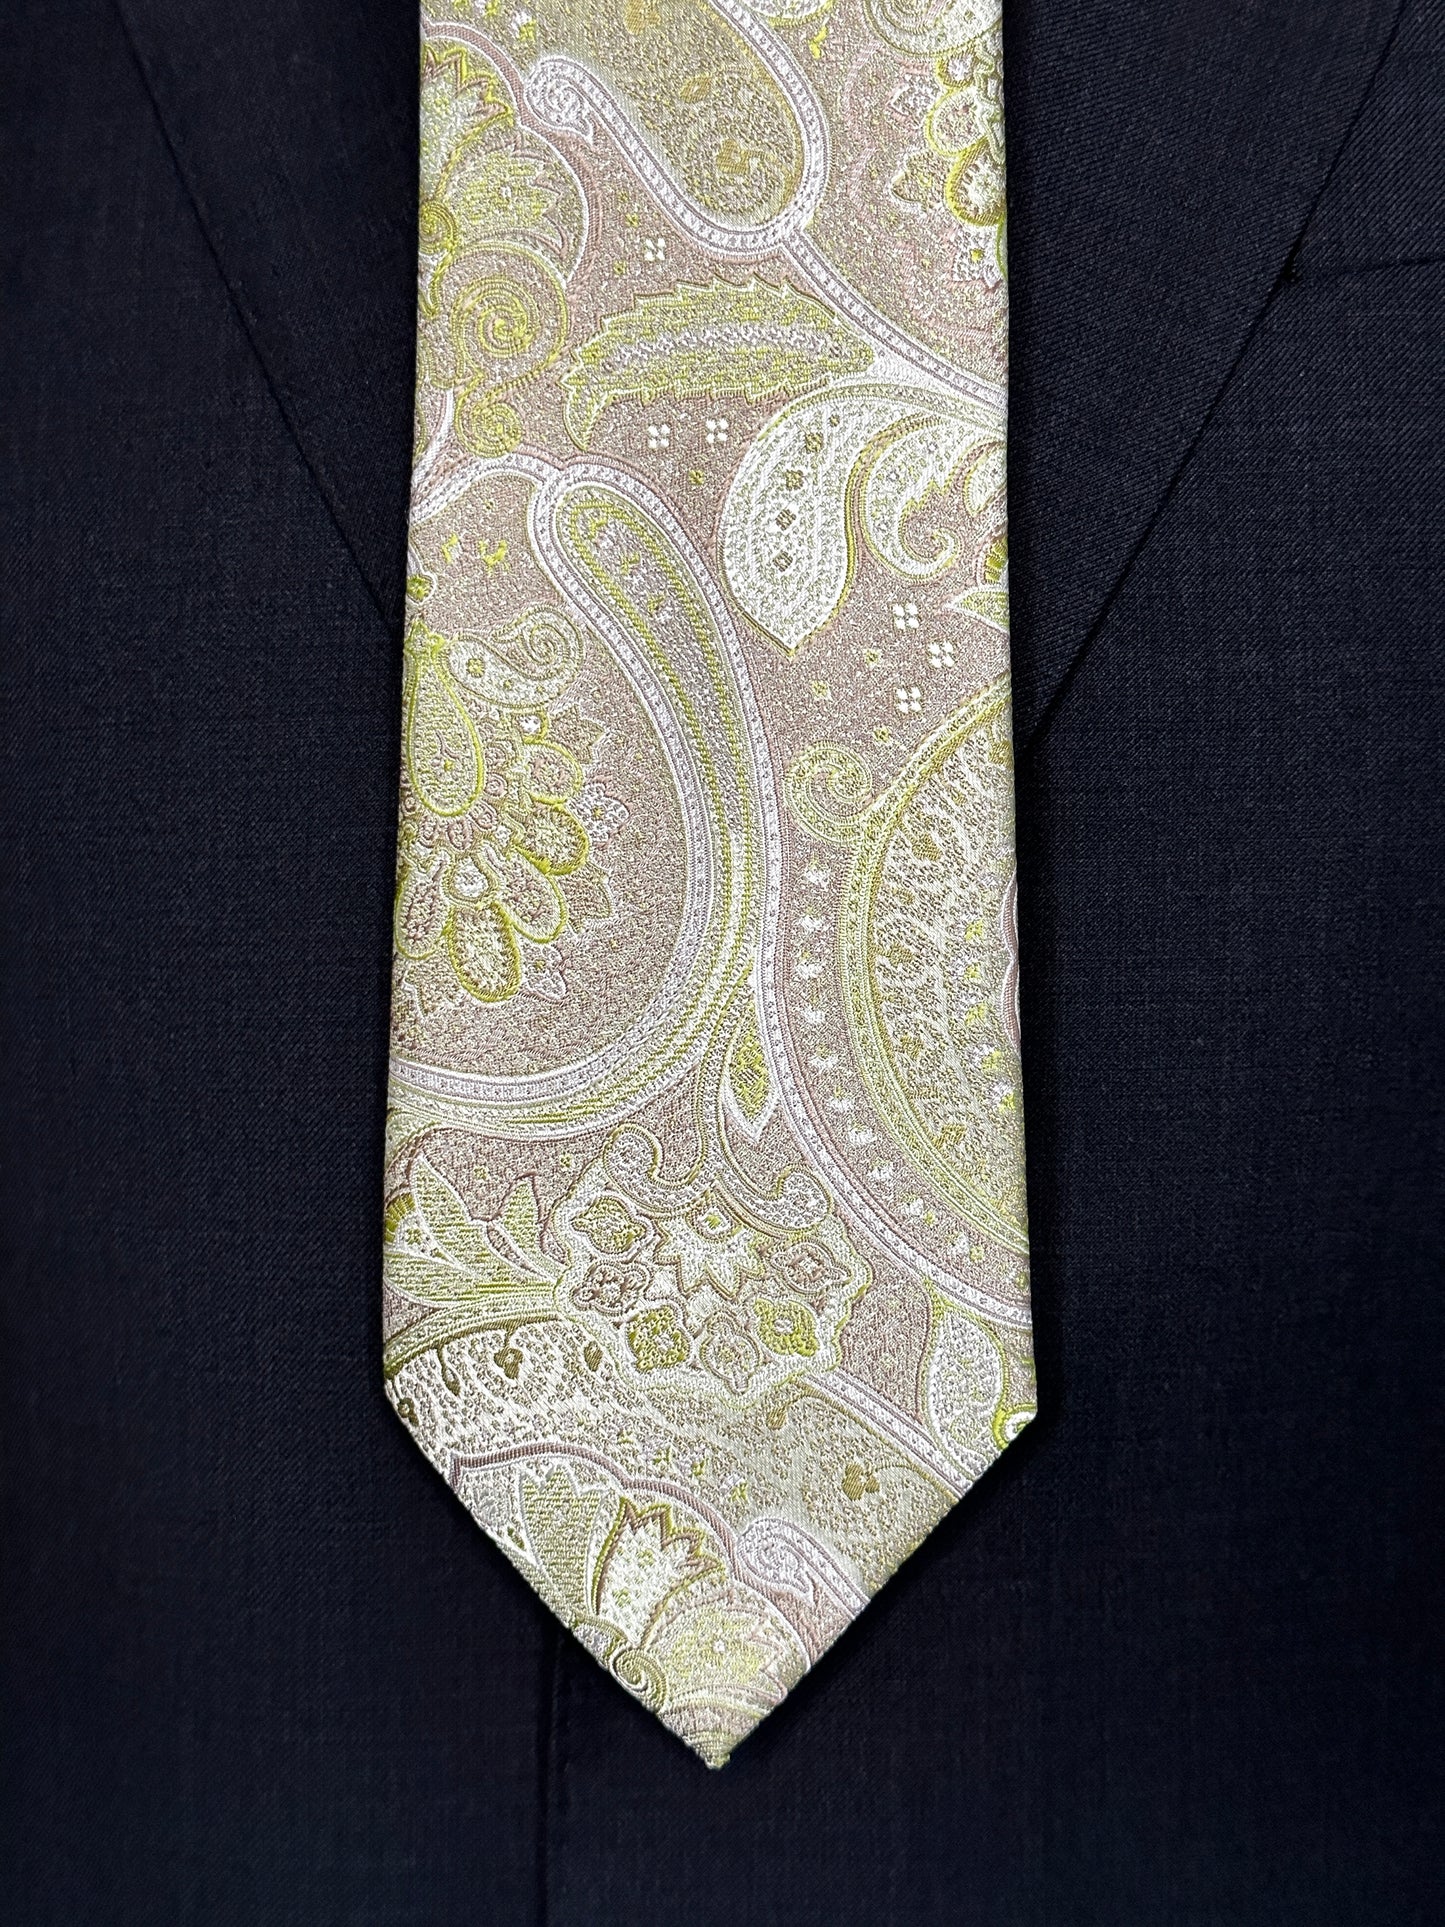 This overall paisley necktie in pure silk, is a stunning example of what a beautifully woven textured necktie can achieve. Regardless of what suit this tie stands out. It has the old European world charm and class that many ties these days lack. This tie is as timeless as possible. It is always in fashion in any season.